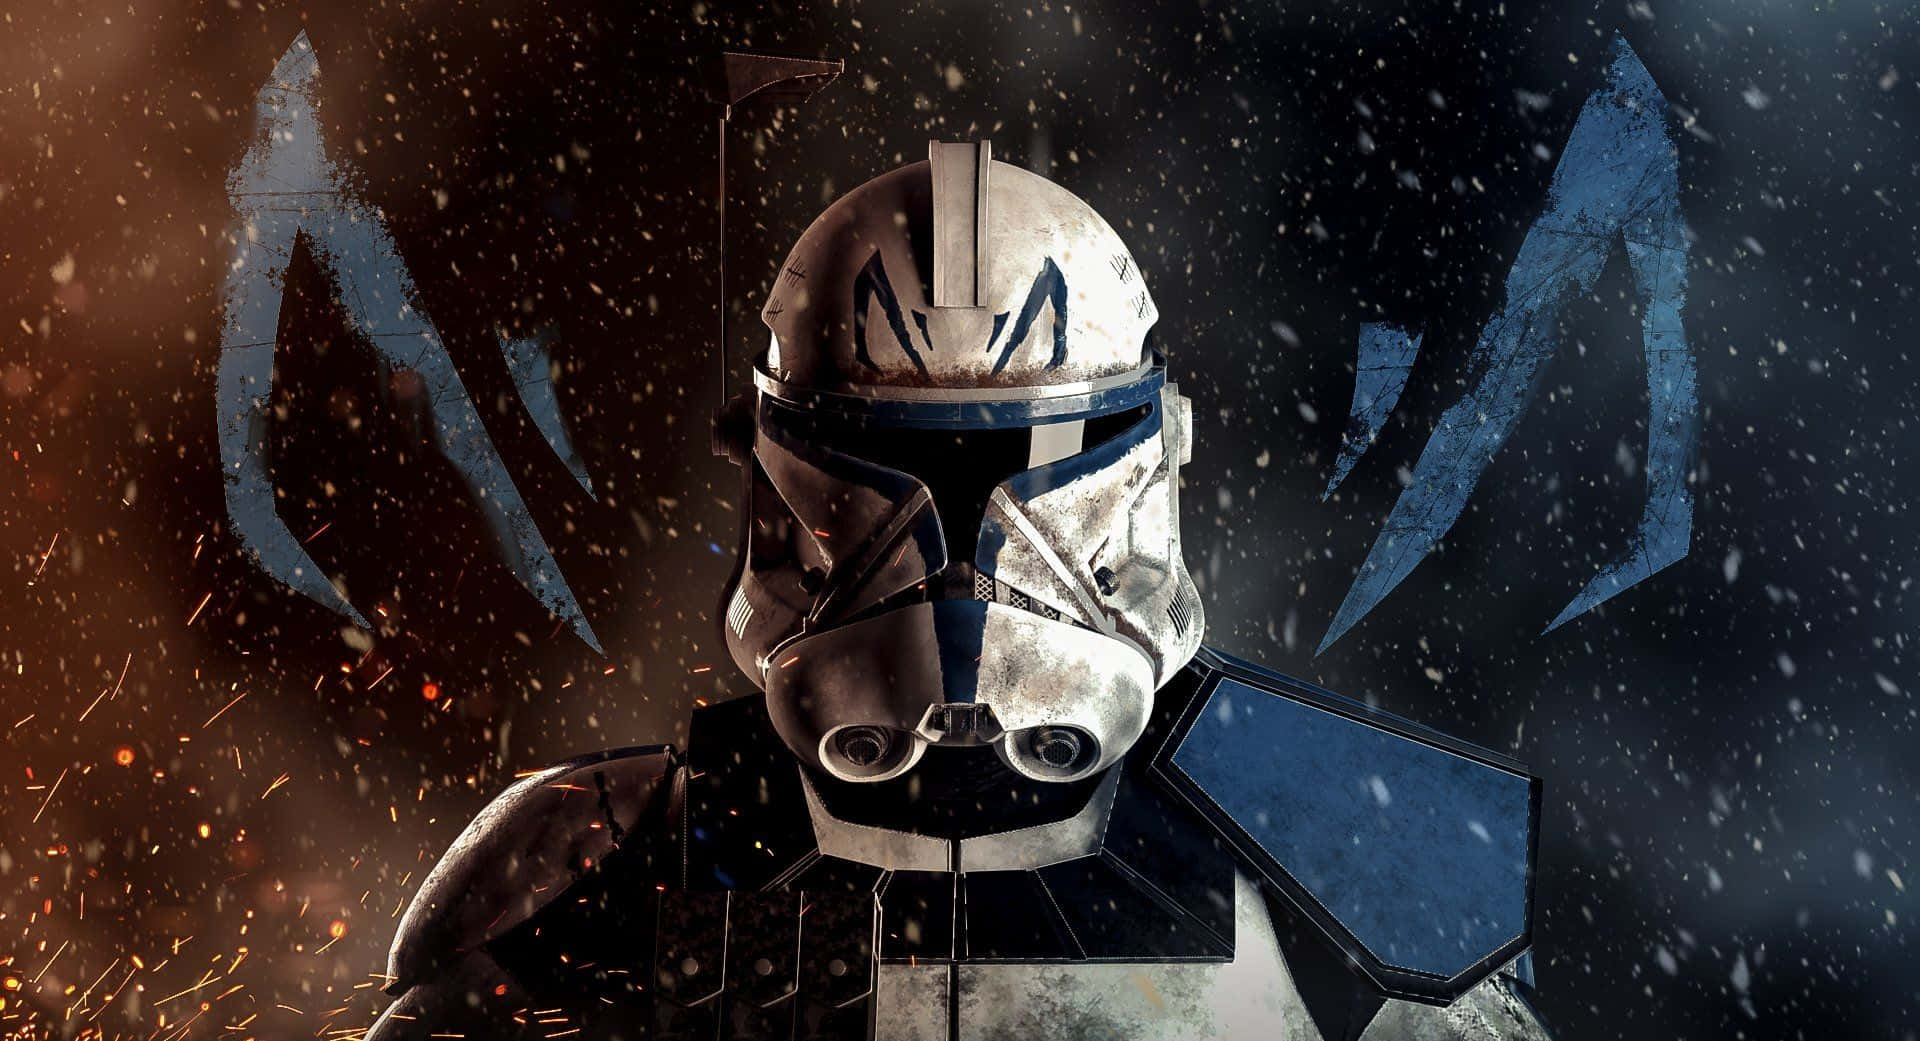 Amidst the turmoil of a galactic conflict, heroes emerge. Wallpaper